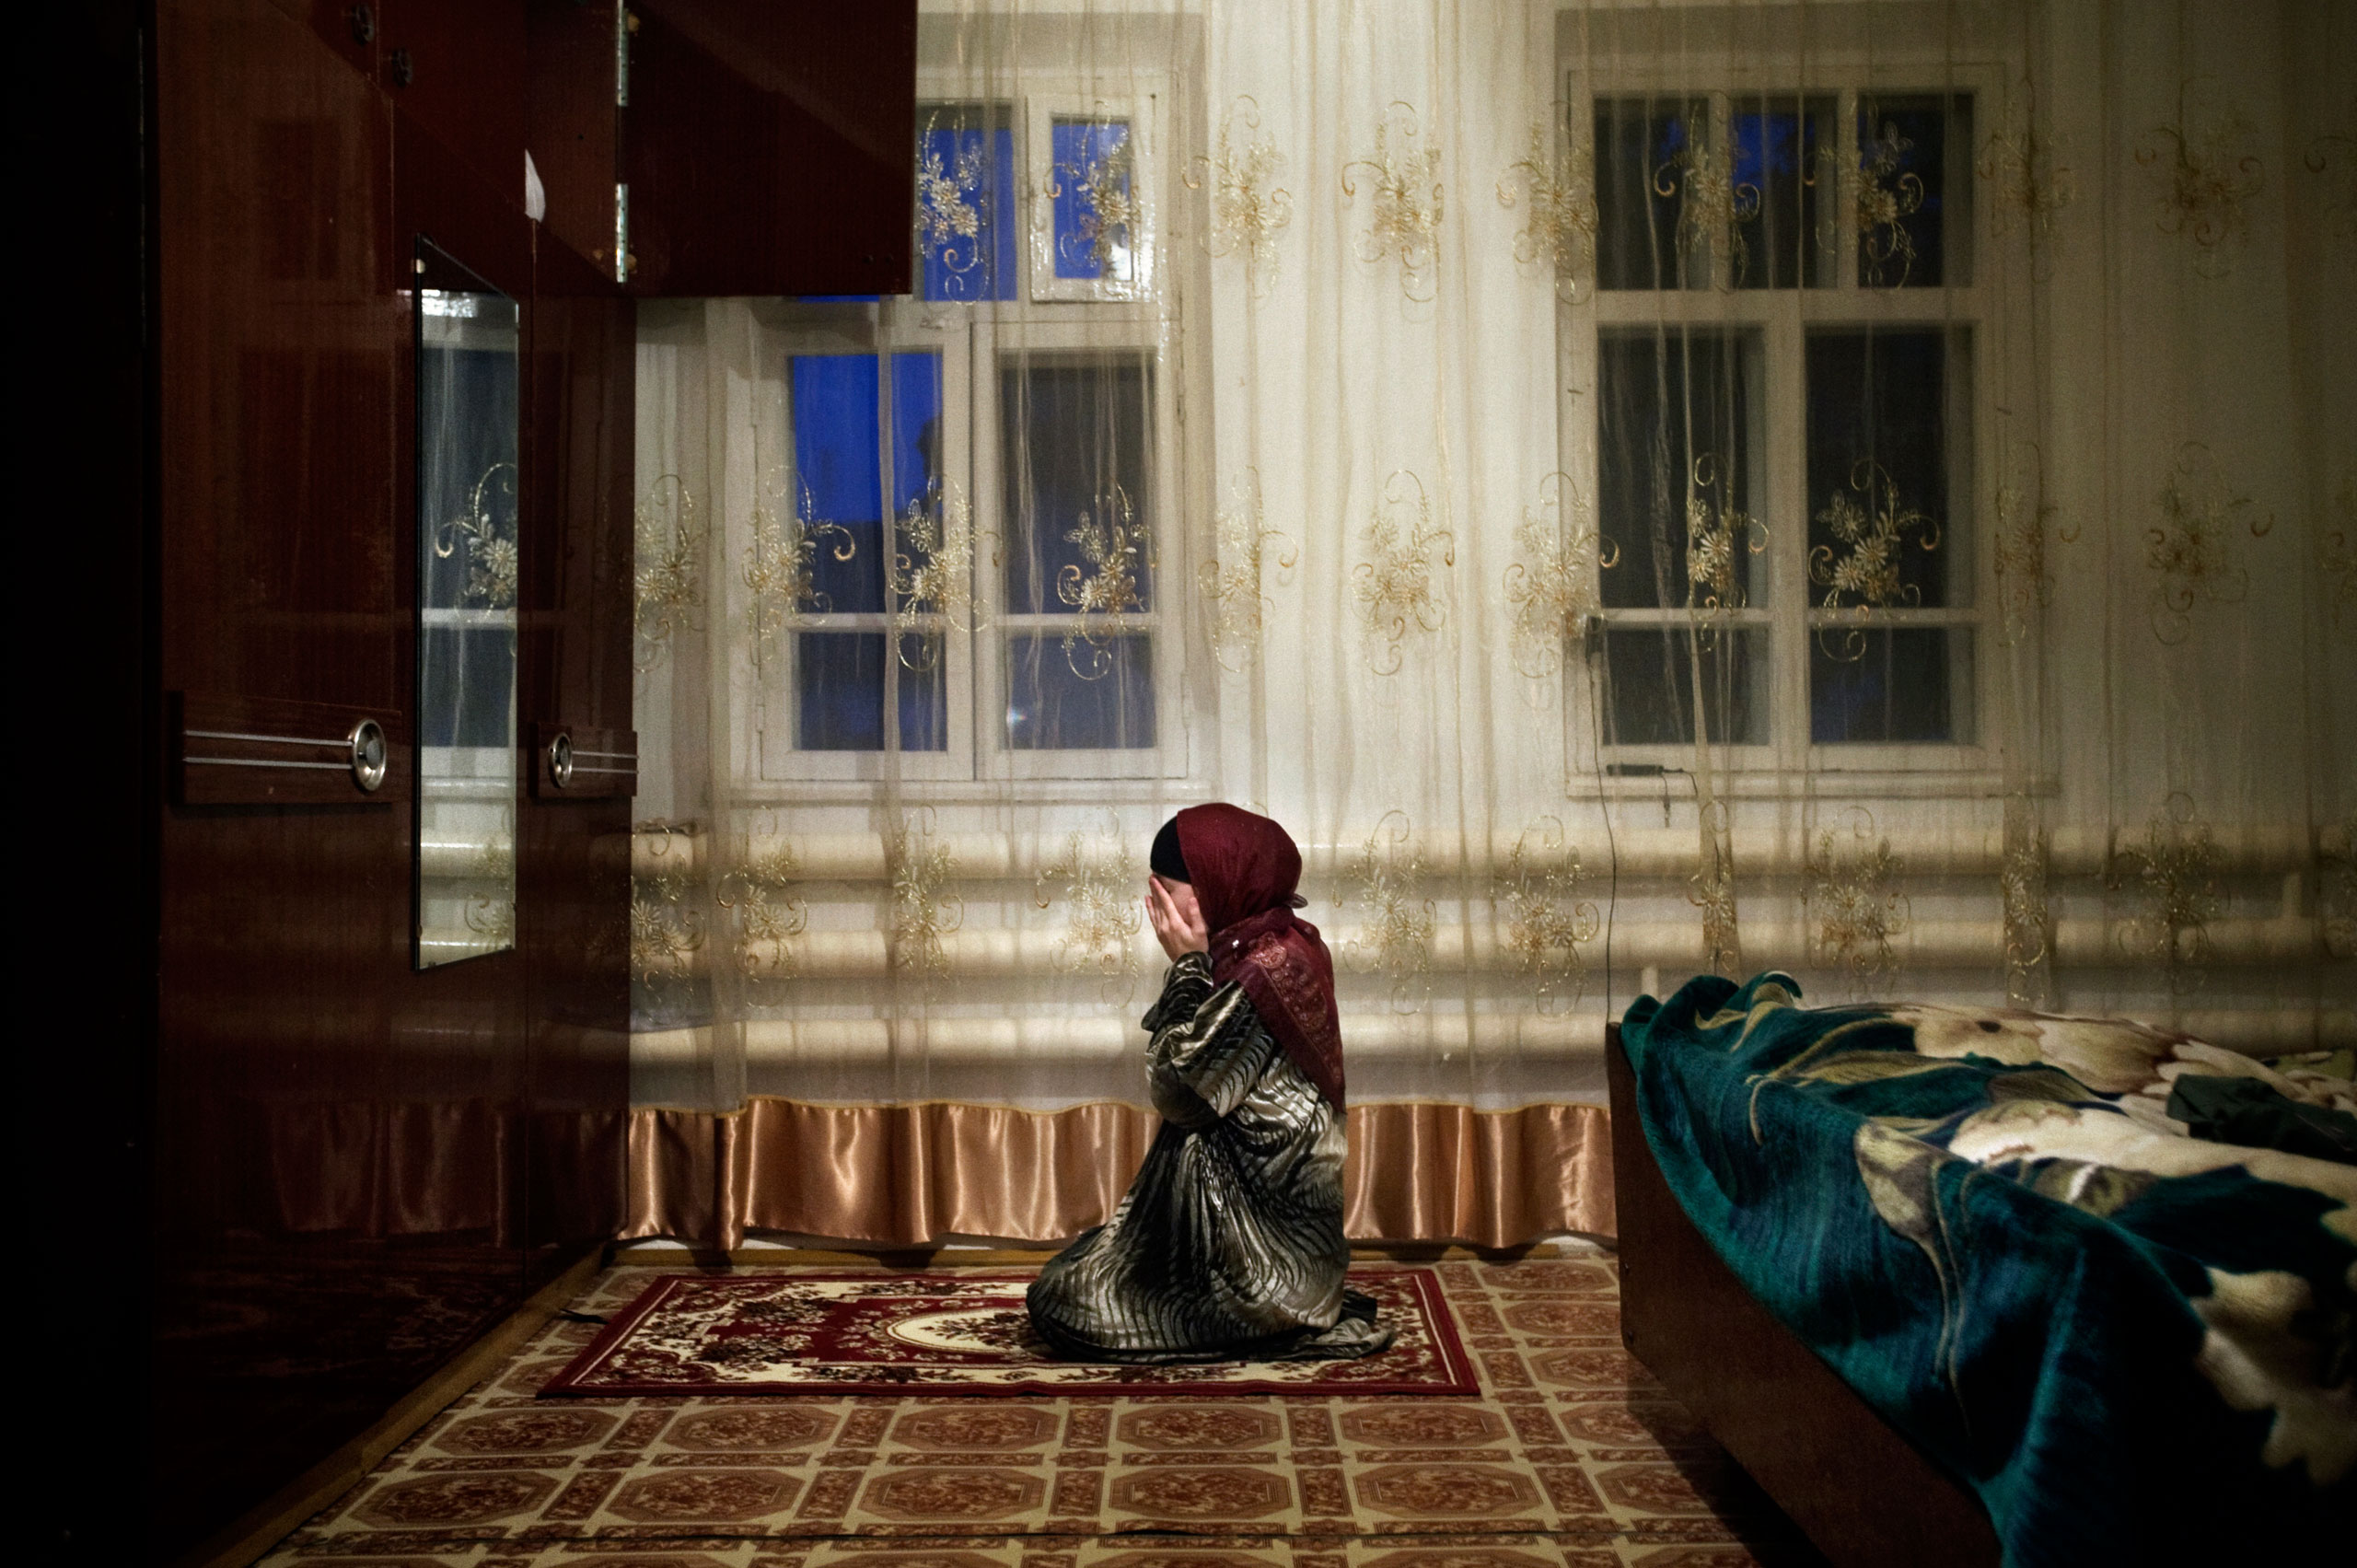 Nurjan prays in her house in Shali, Chechnya. Her brother Yusuf was killed by Chechen military and another brother, Abdul Yazid, was abducted, October 2009.